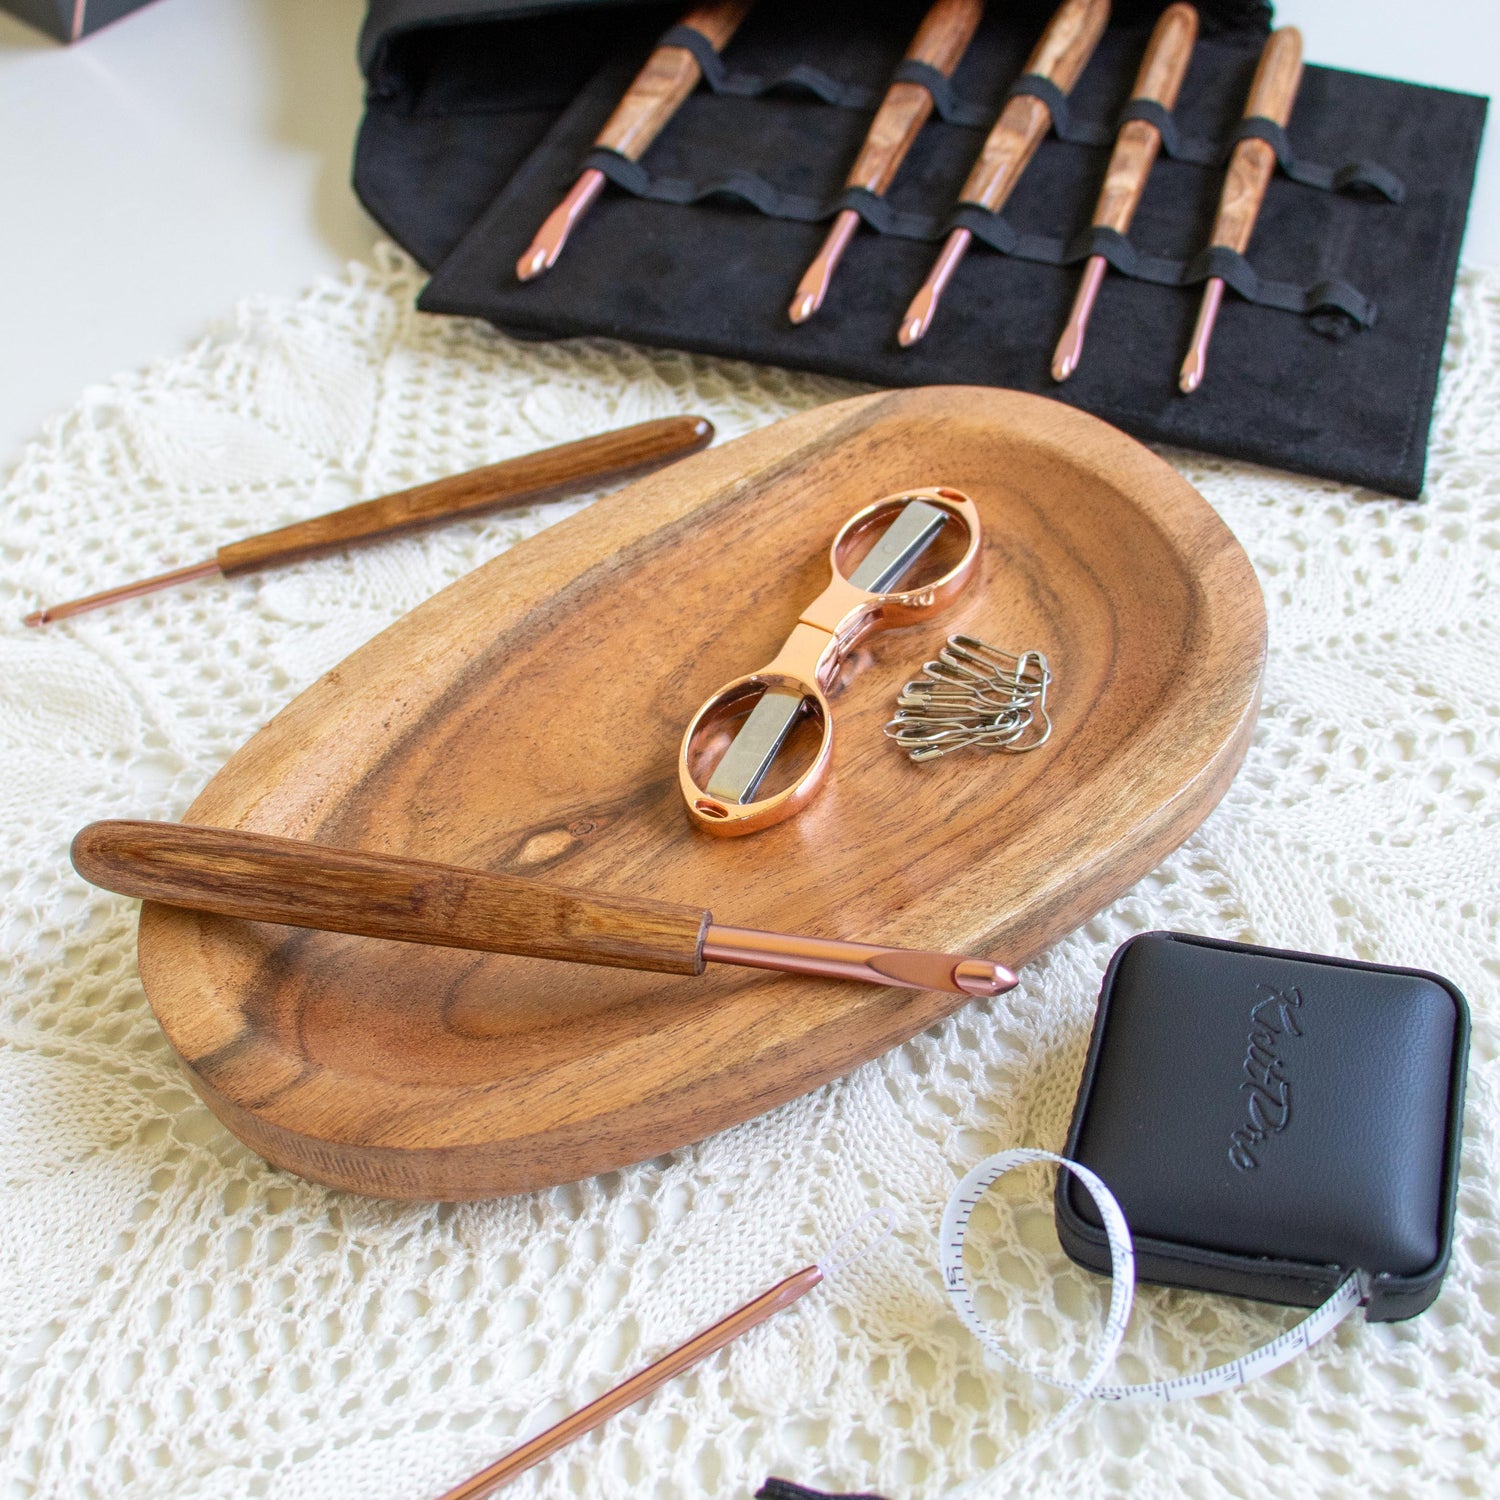 Discover KnitPro's 2024 Mother's Day Limited Edition offering - the Mellow Crochet Hook set